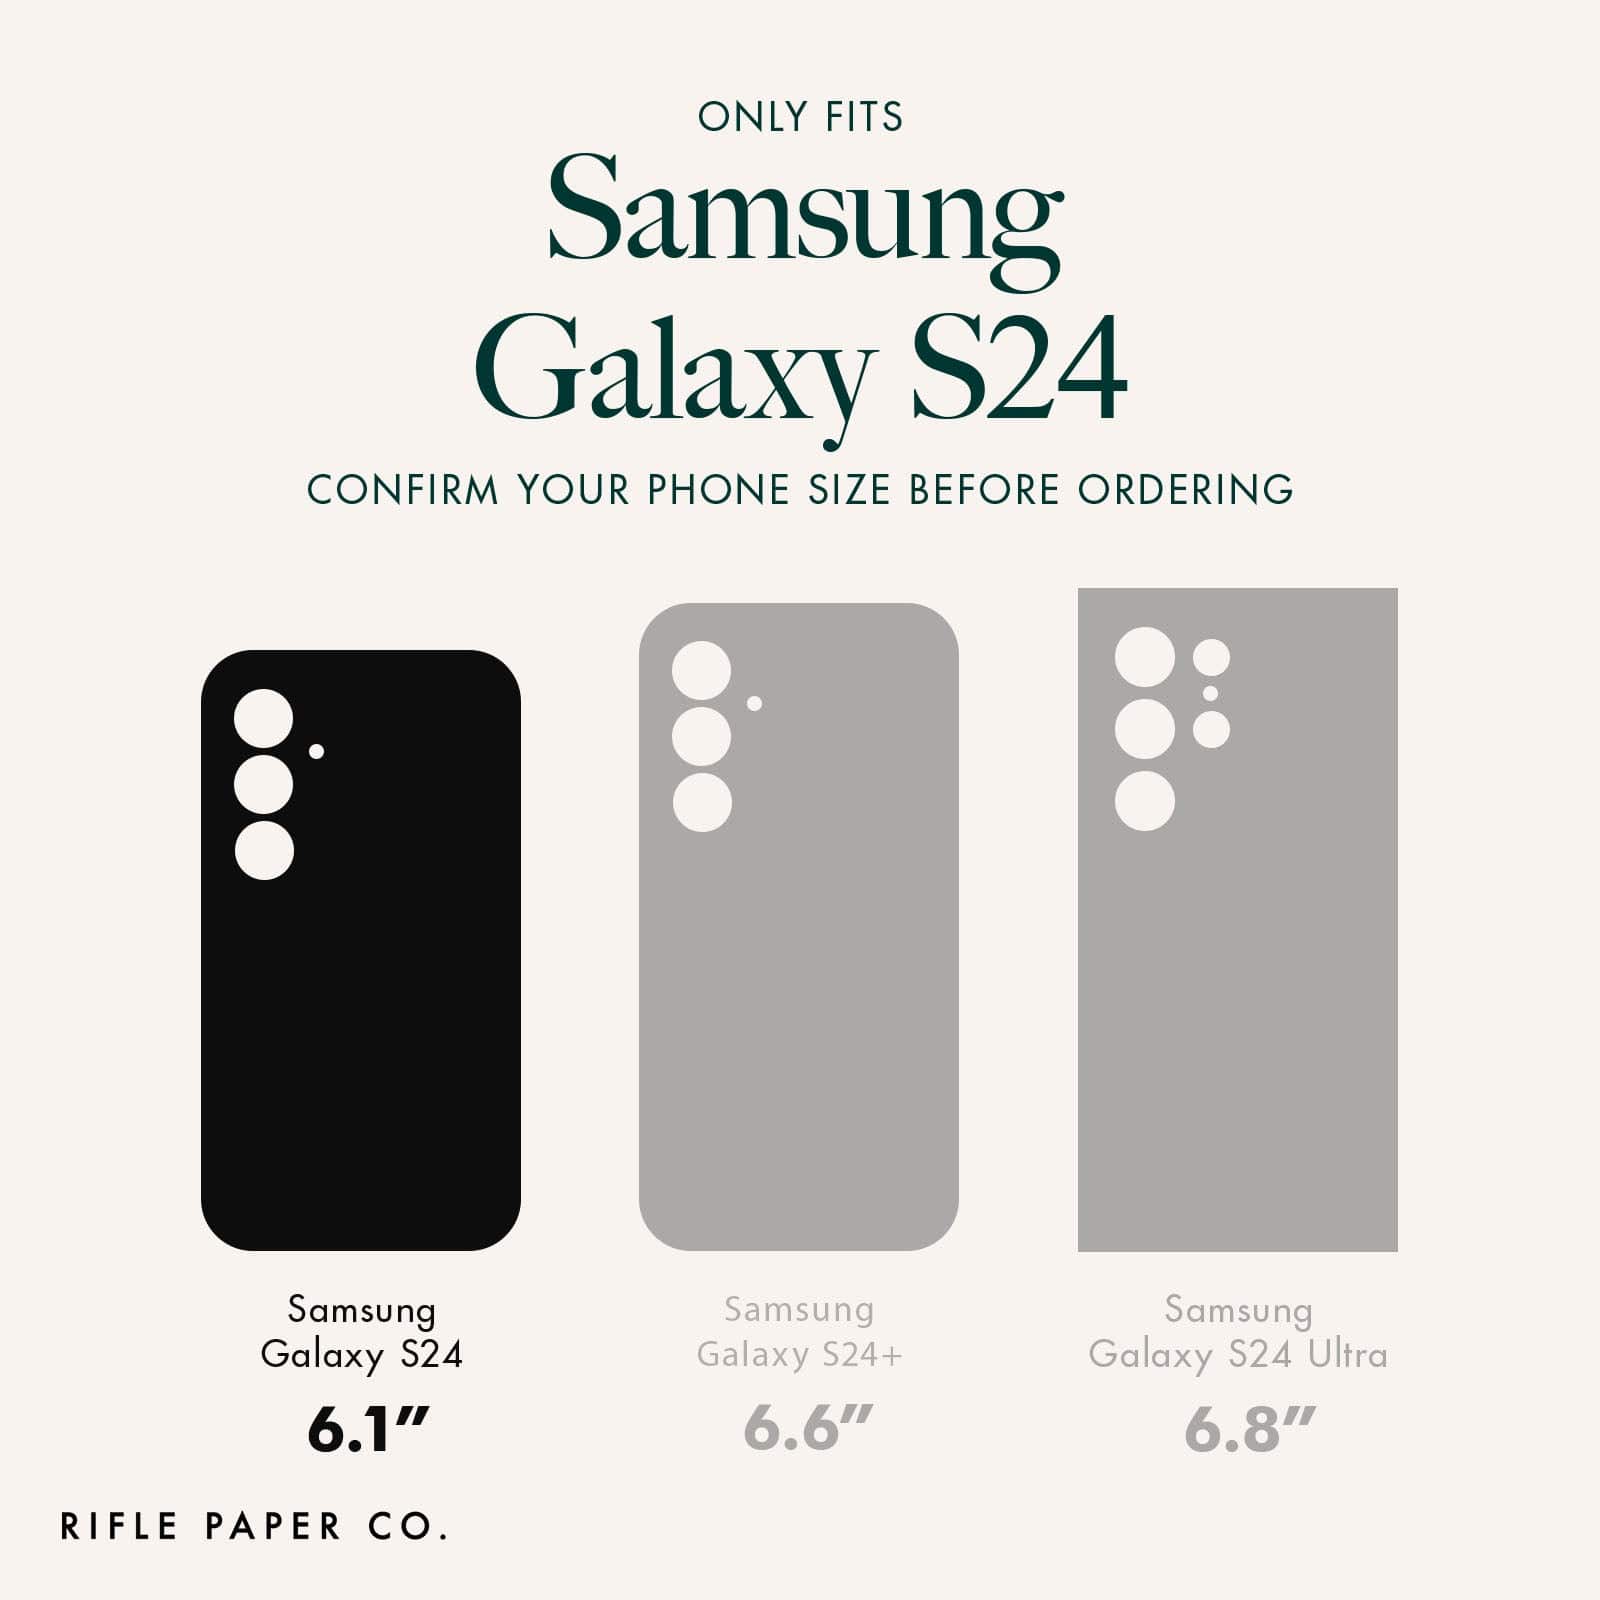 ONLY FITS SAMSUNG GALAXY S24. CONFIRM YOUR PHONE SIZE BEFORE ORDERING